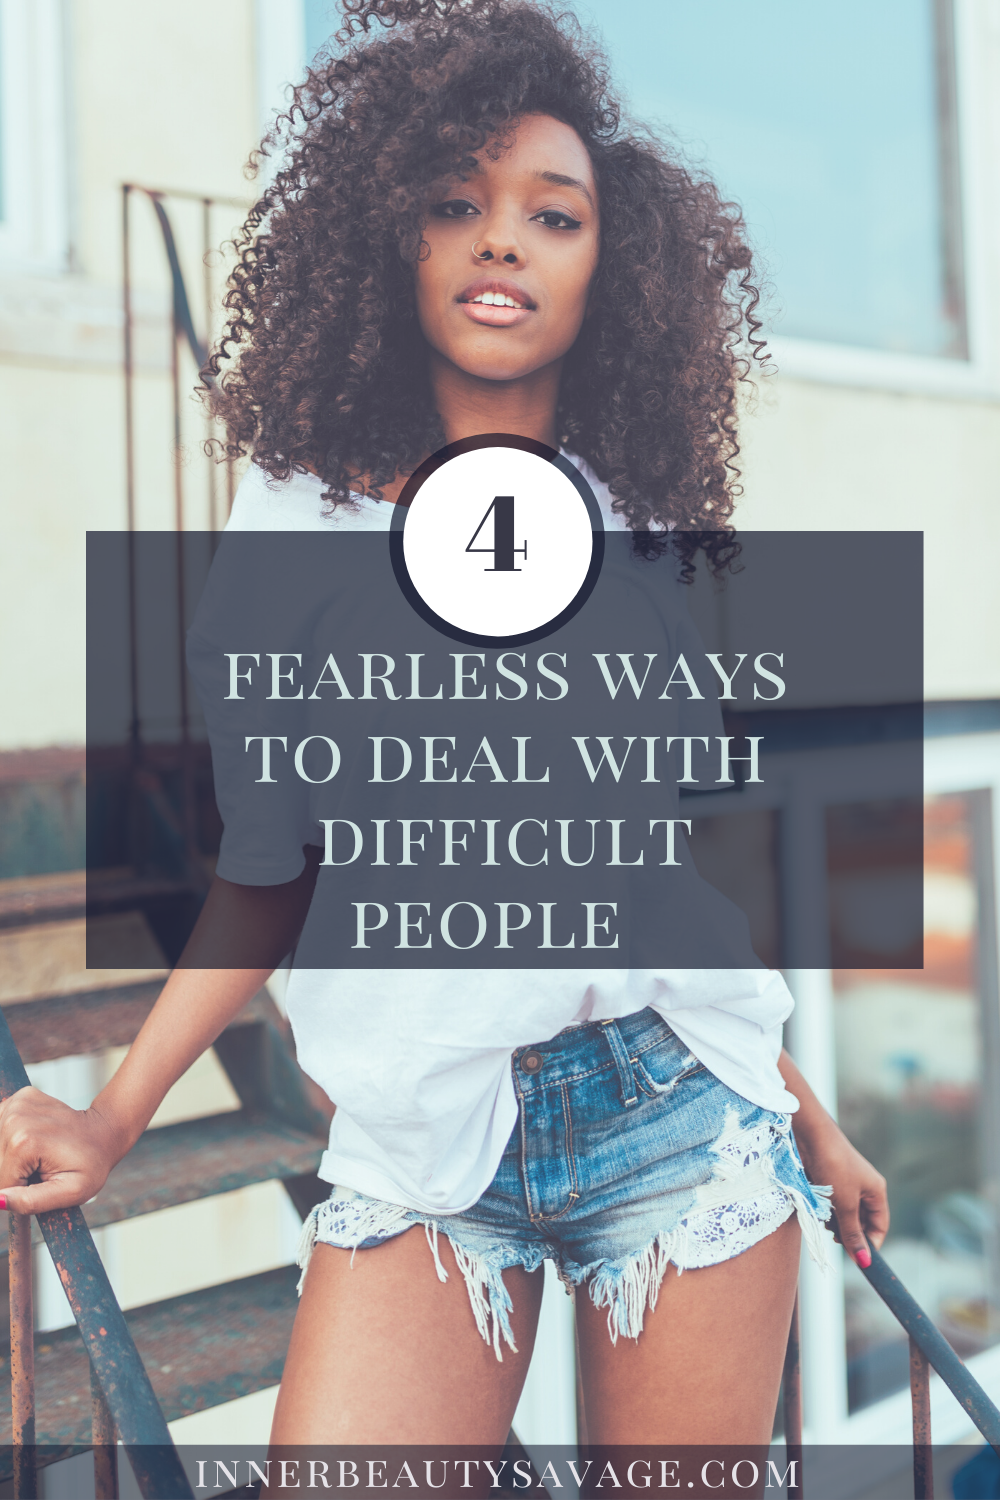 4 fearless ways to deal with difficult people